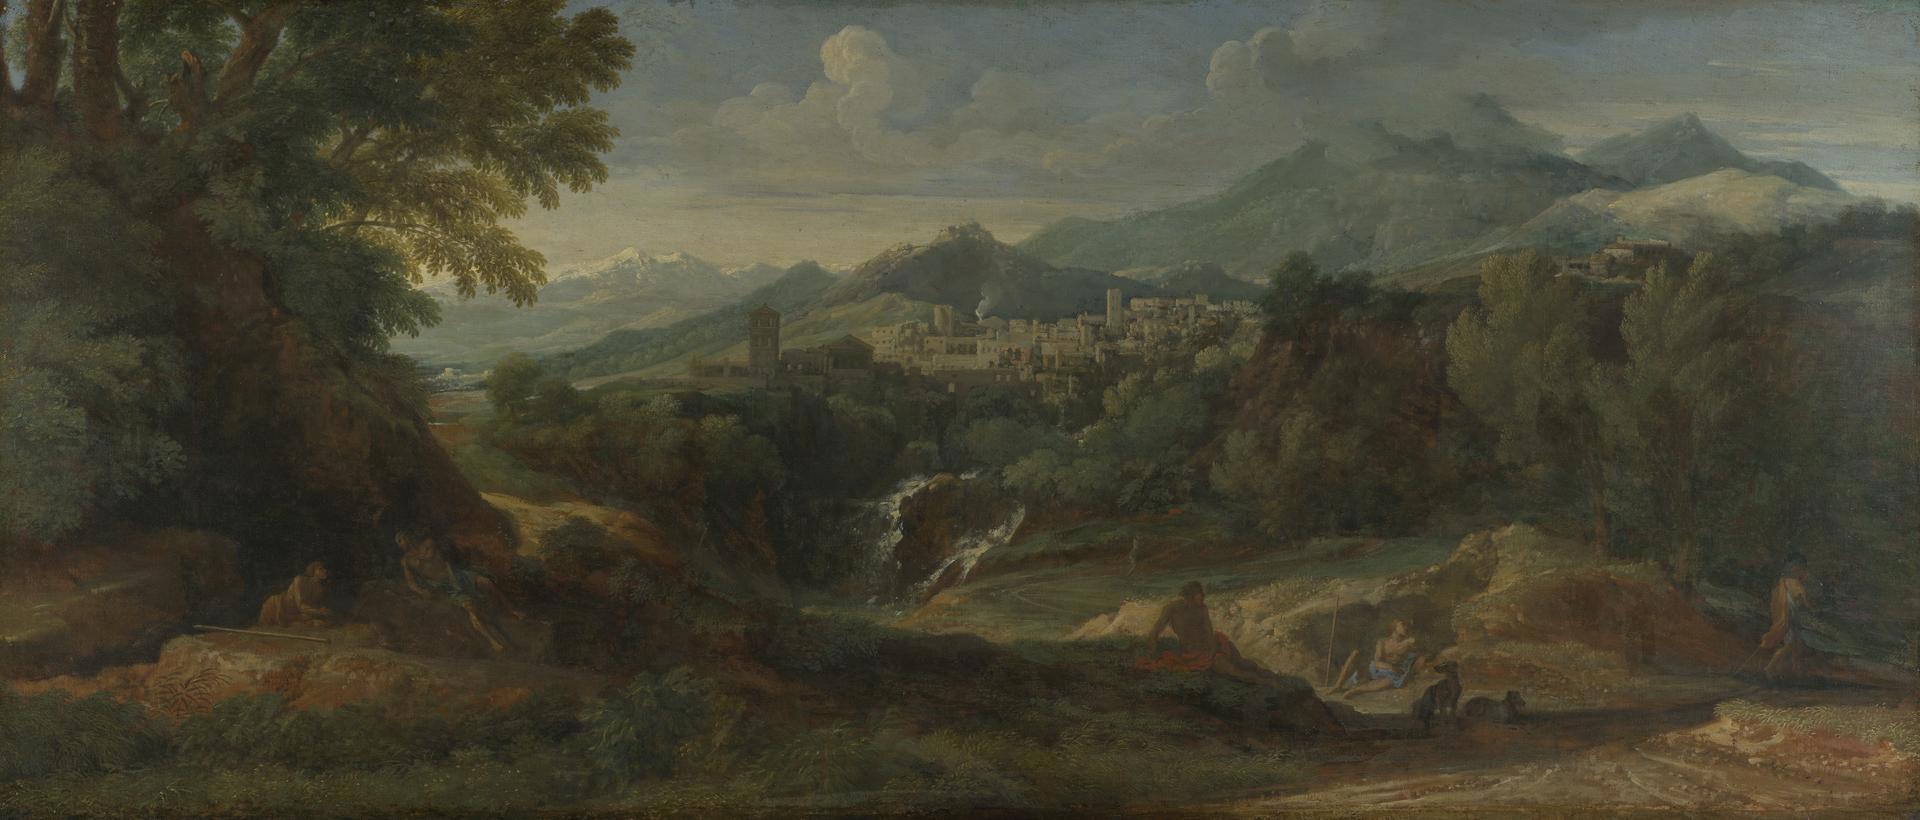 View of the Roman Countryside, possibly Tivoli by Gaspard Dughet